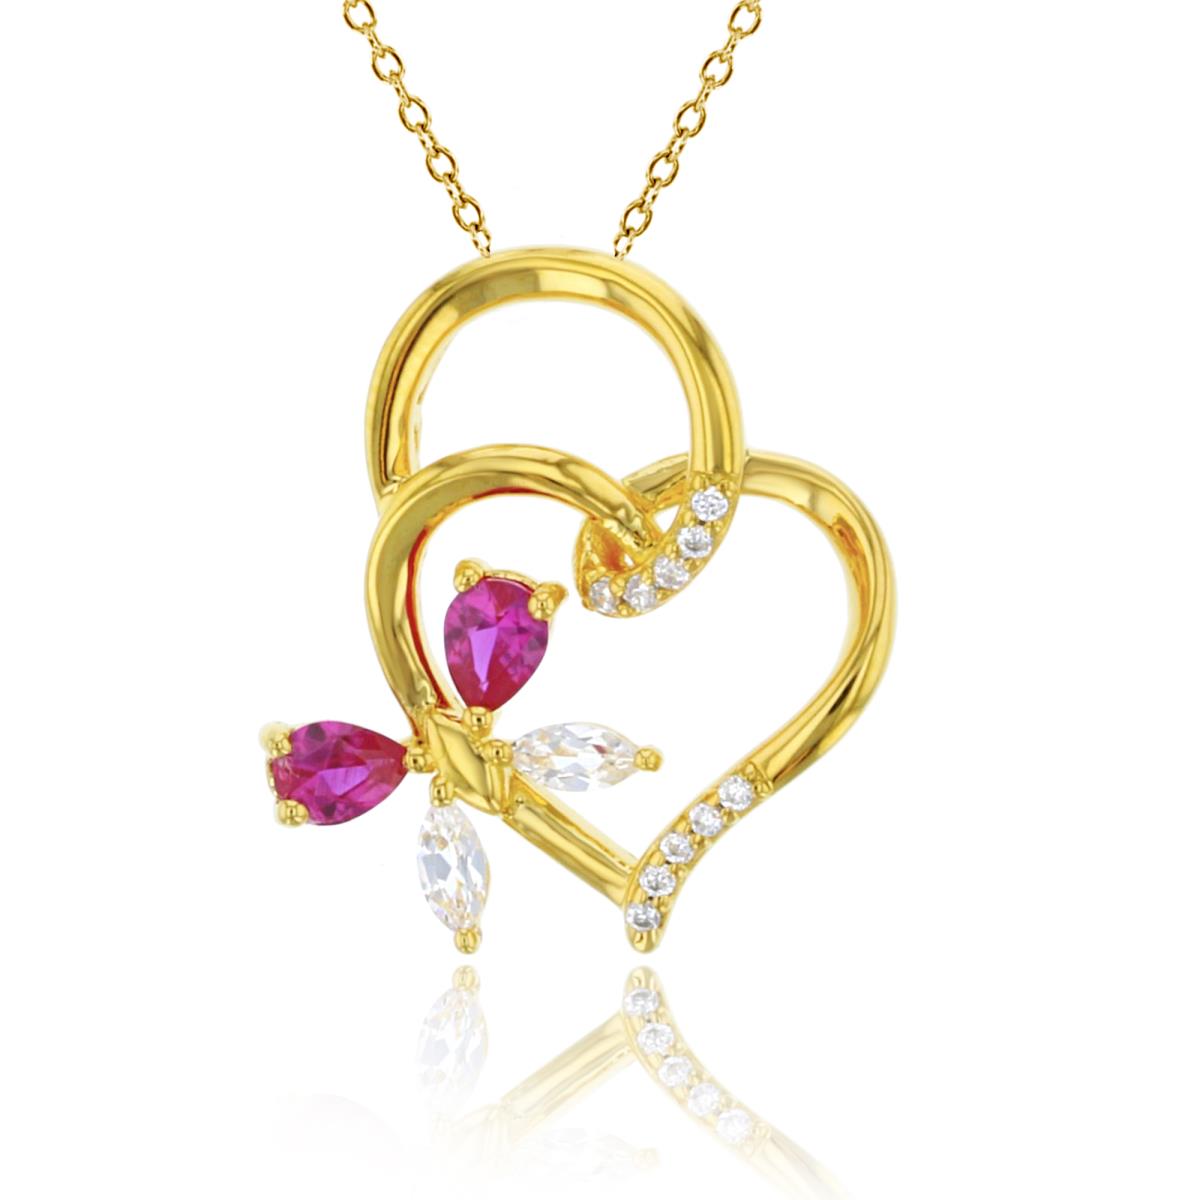 Sterling Silver+1Micron 14K Yellow Gold 0.05cttw Rnd Diam & PS CR Emerald /Mq White Sapphire Dbl Hearts/Flower 18"Necklace